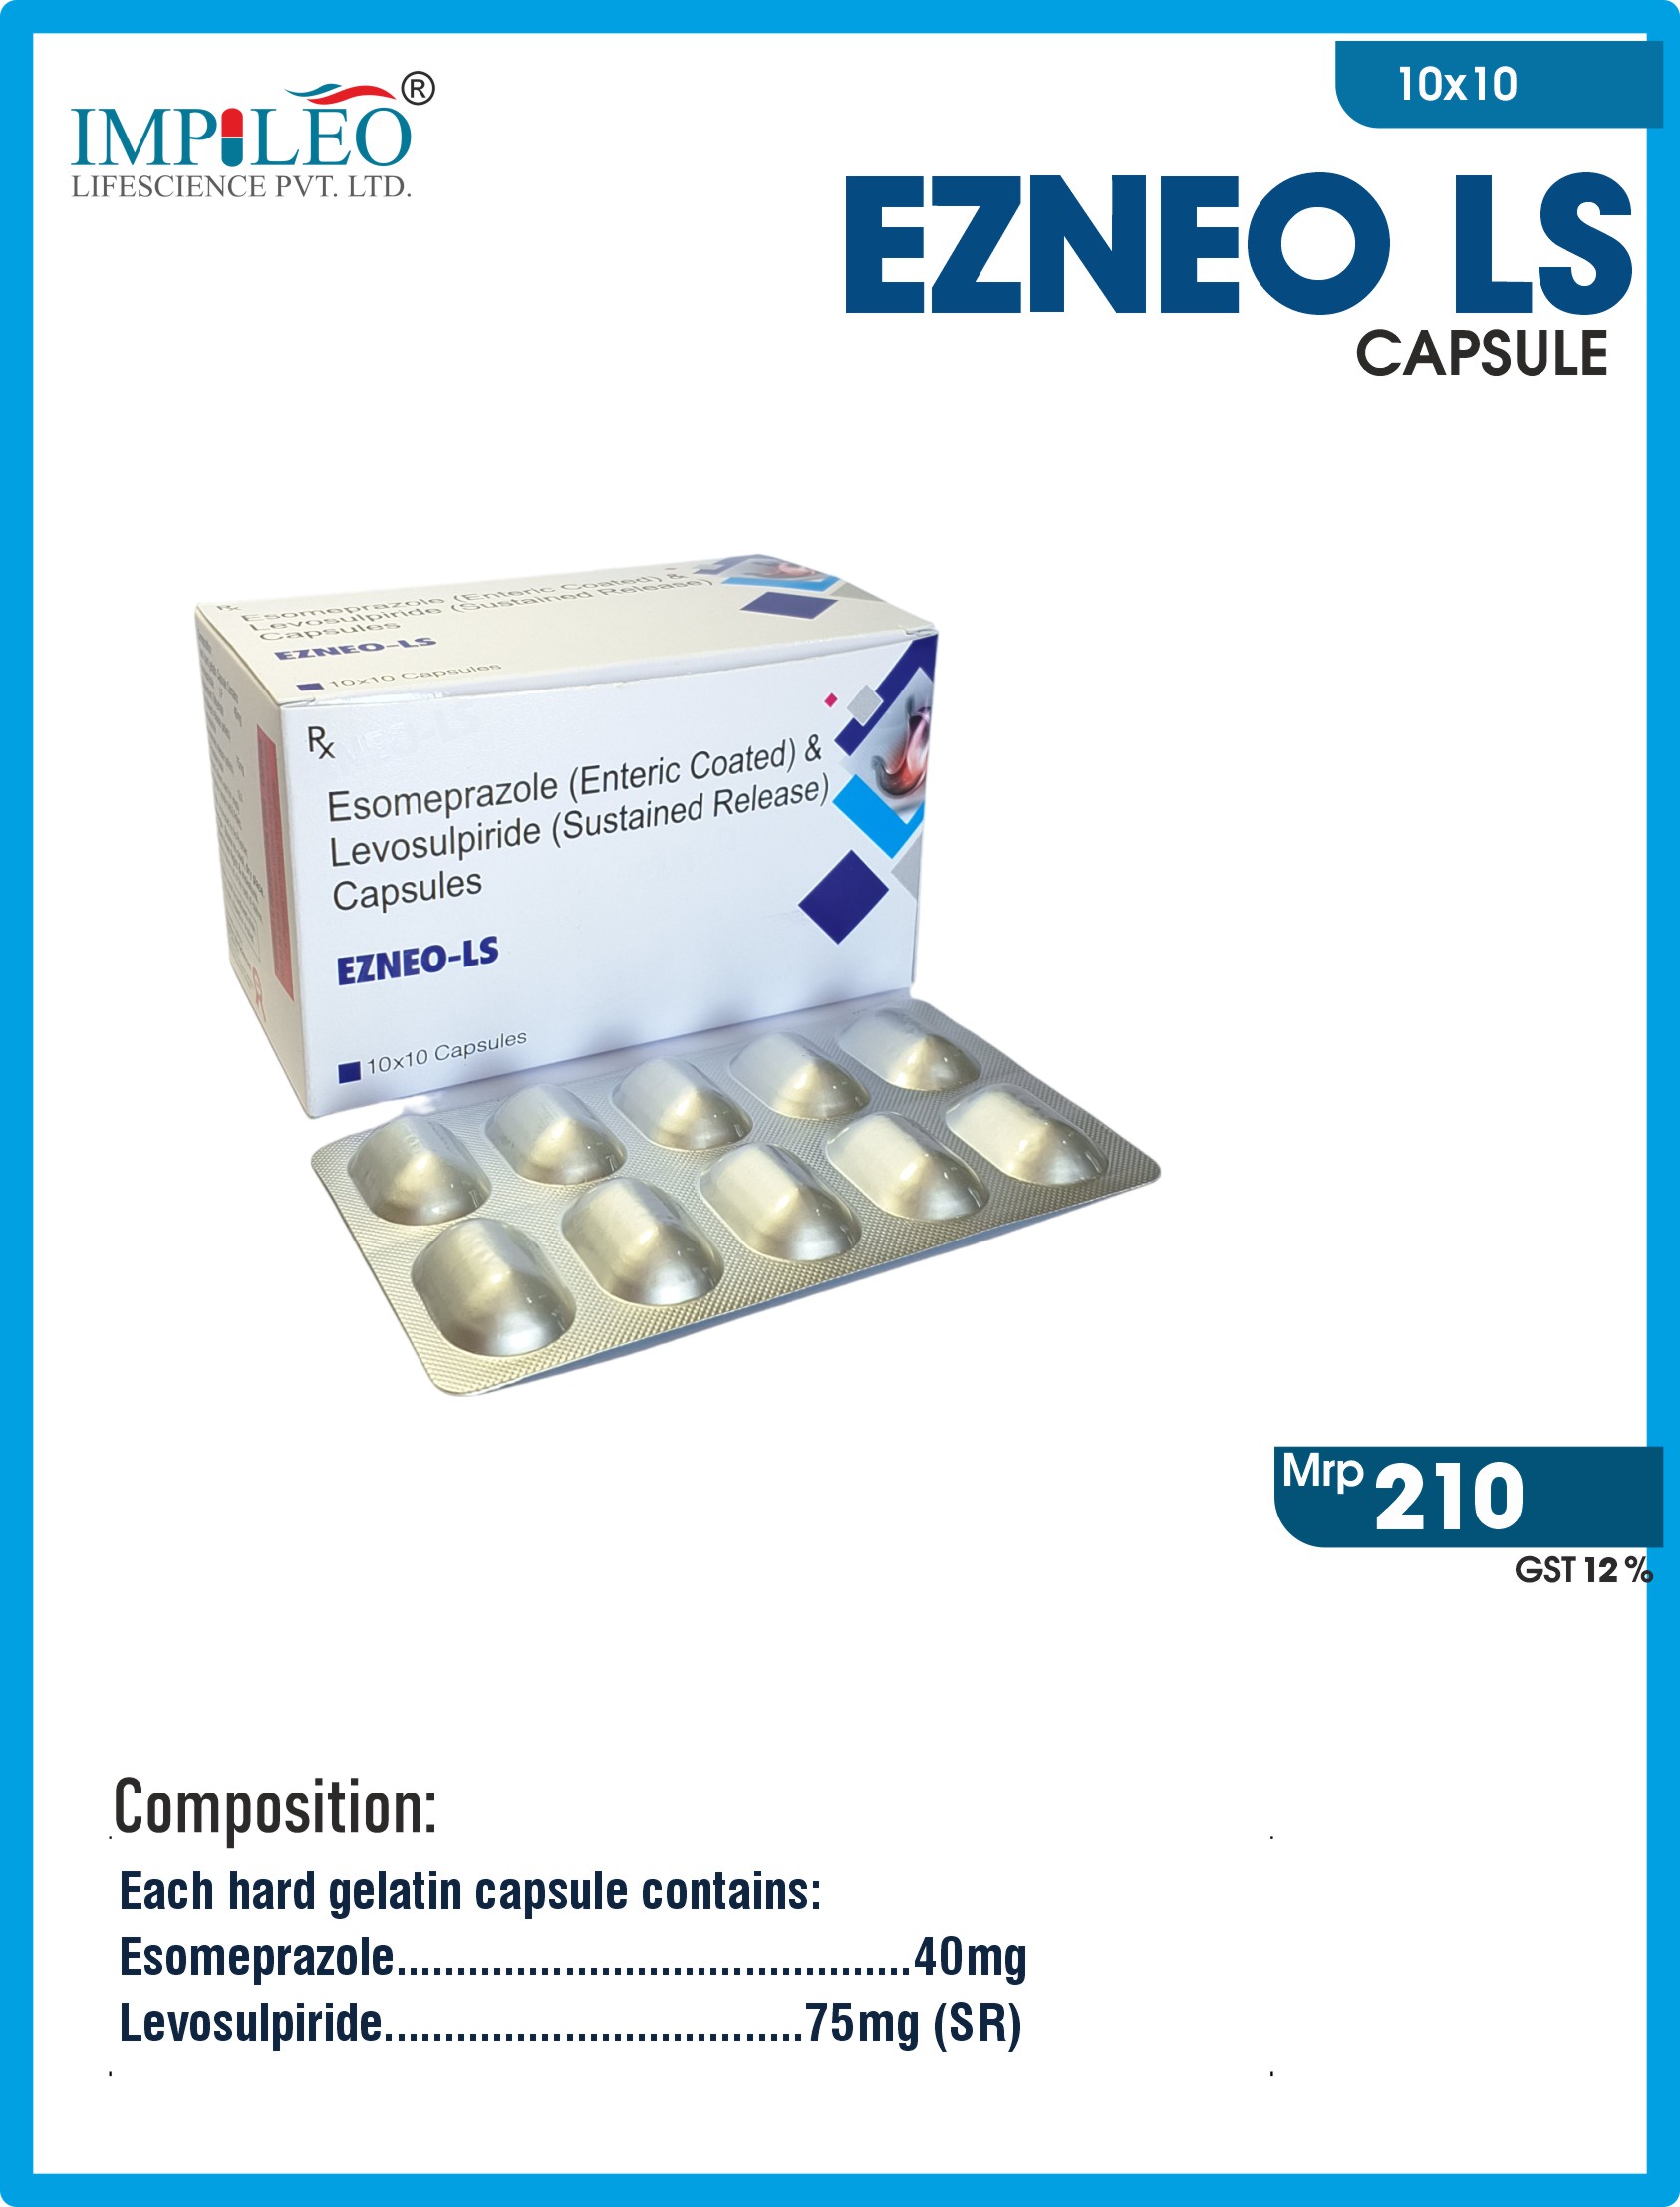 EZNEO LS Capsule : Lucrative PCD Pharma Franchise in Chandigarh